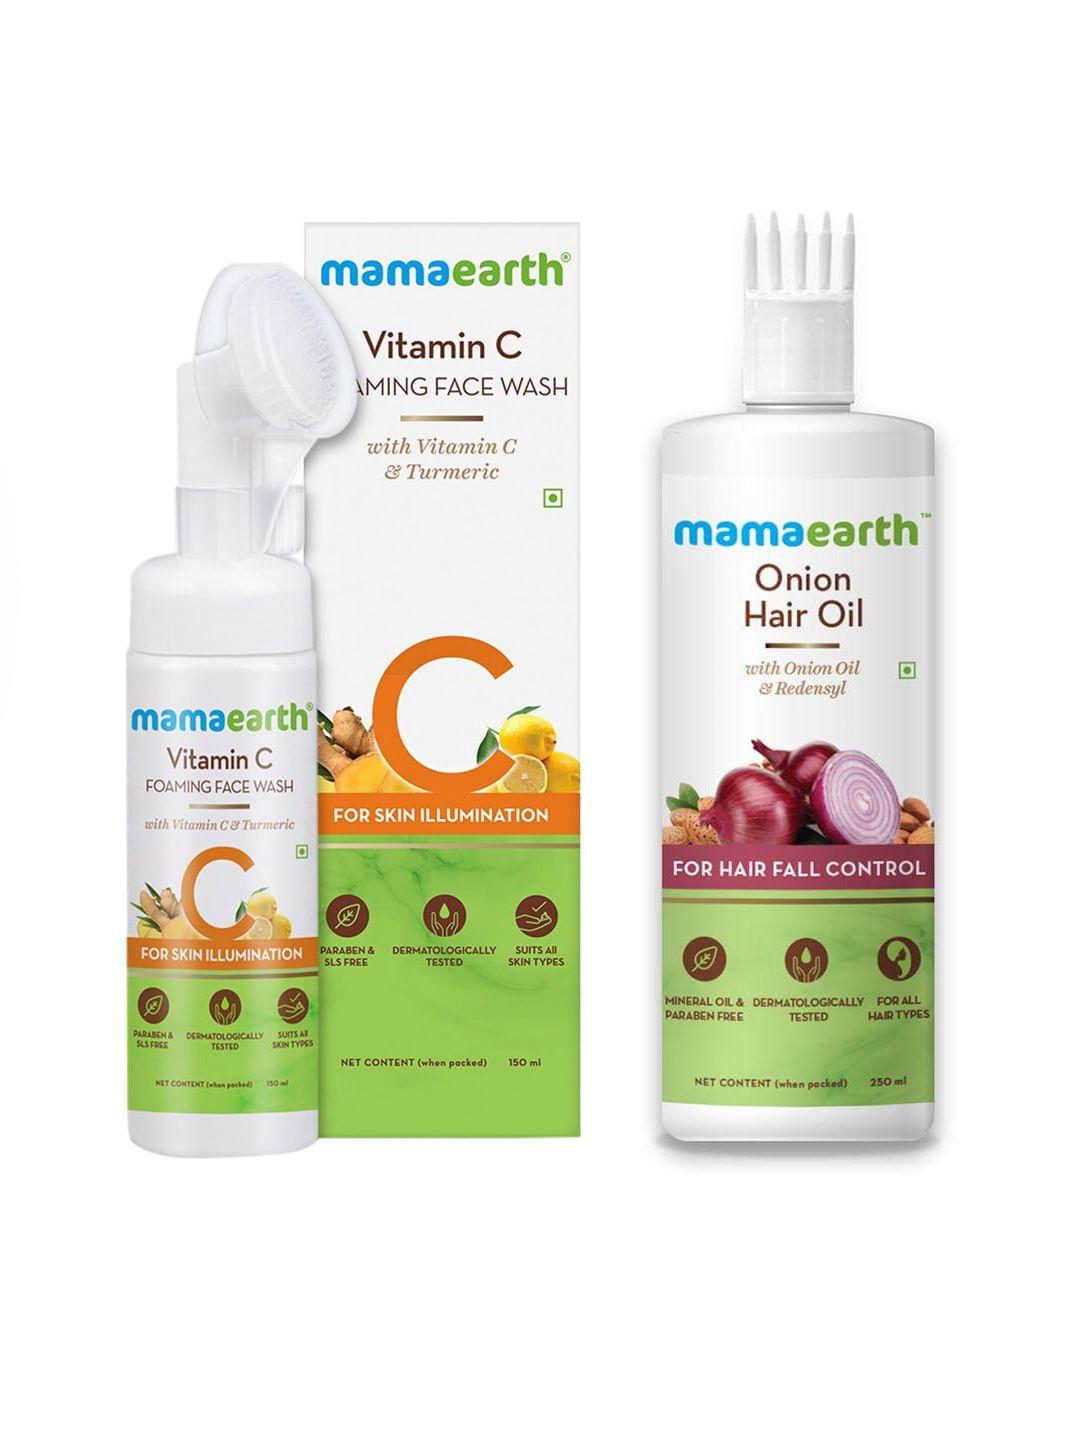 mamaearth-unisex-set-of-vitamin-c-foaming-face-wash-&-sustainable-onion-hair-oil